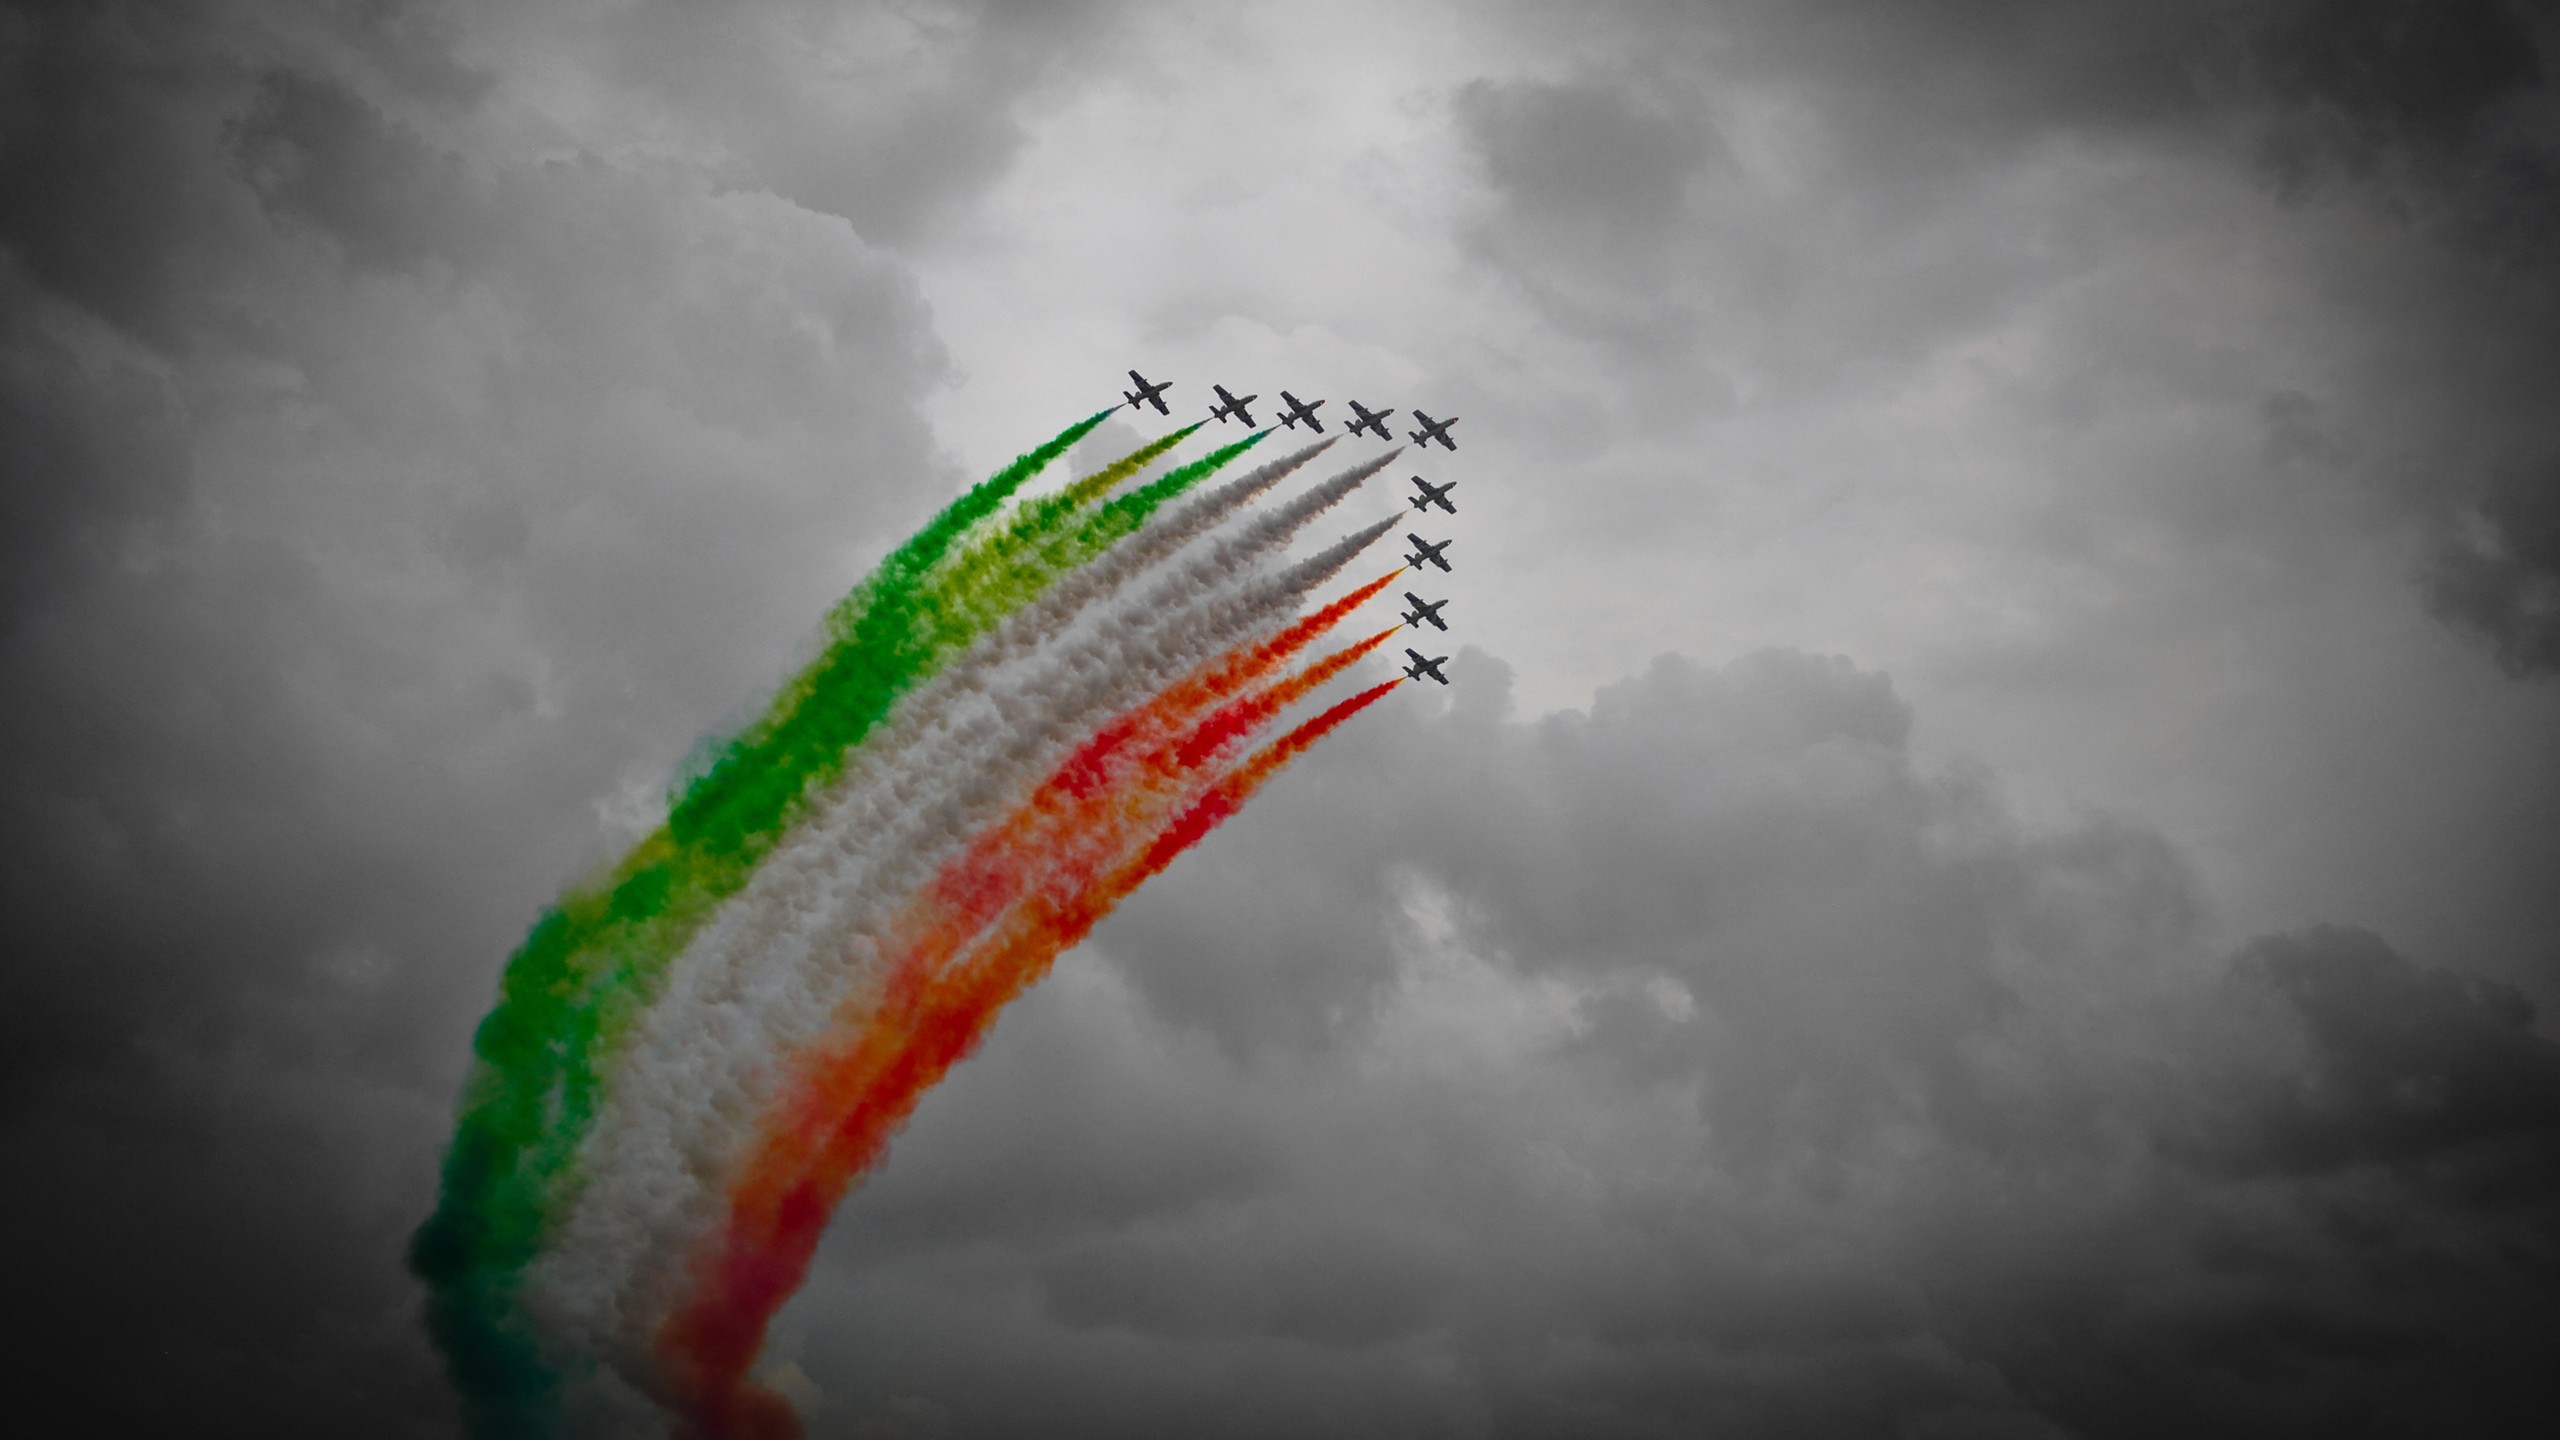 Tricolor made of coloured smoke wallpapers and images - wallpapers